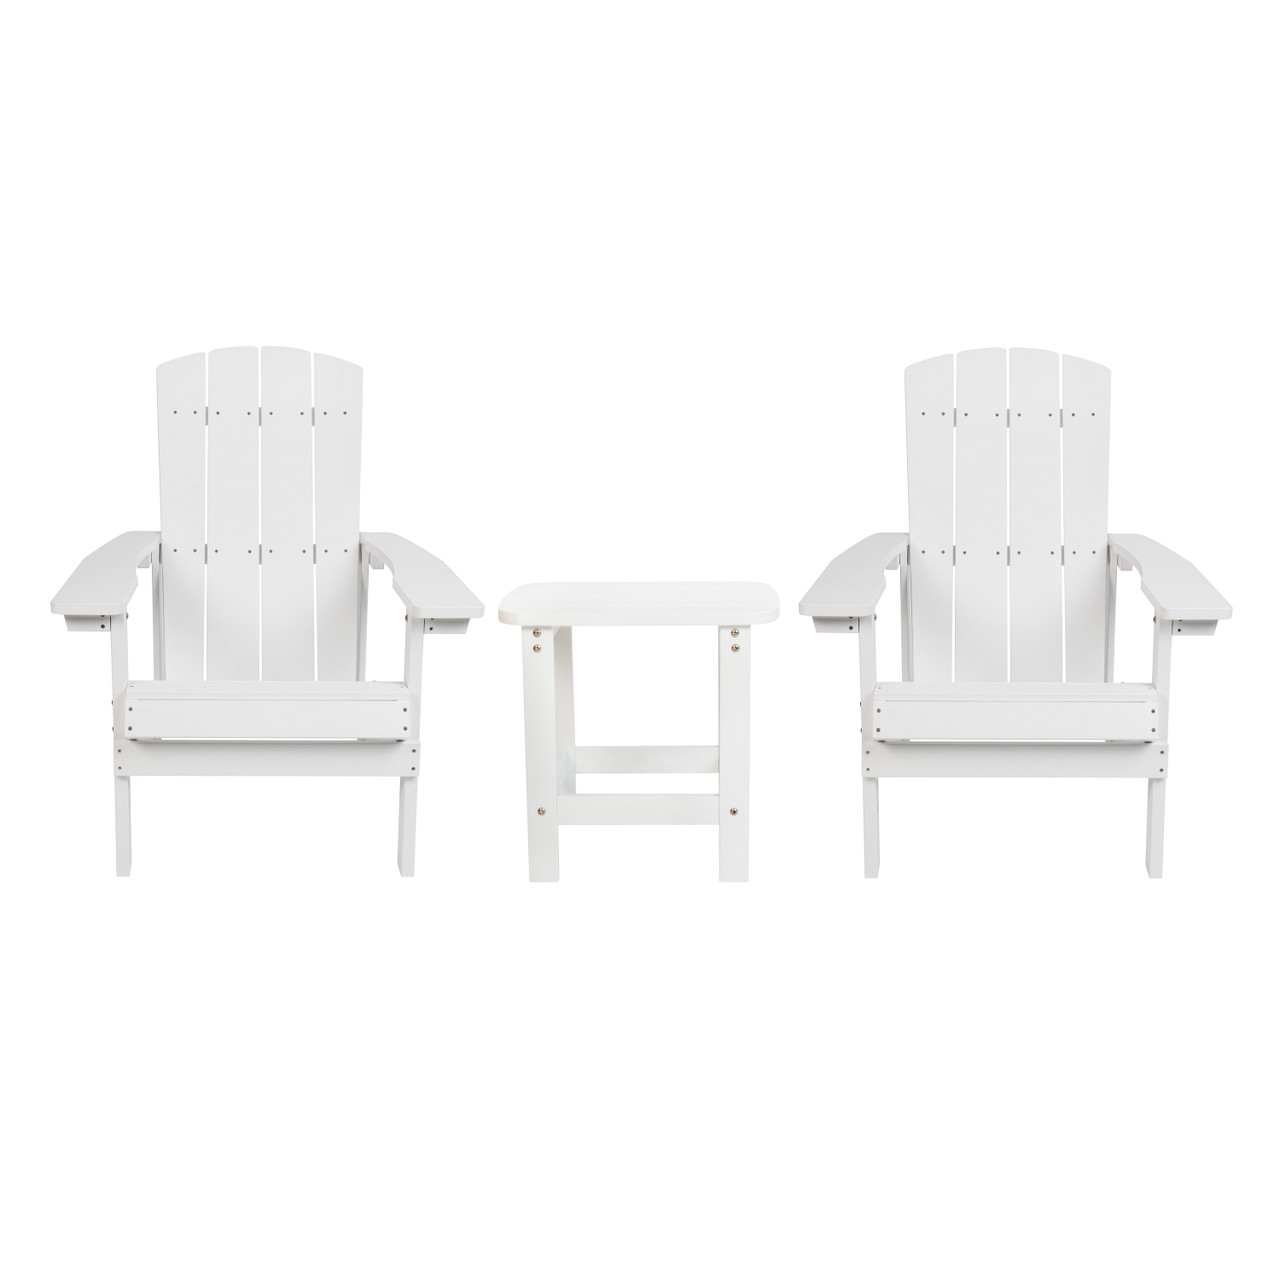 Flash Furniture 2 Pack Charlestown All-Weather Poly Resin Wood Adirondack Chairs with Side Table in White, Model# JJ-C14501-2-T14001-WH-GG